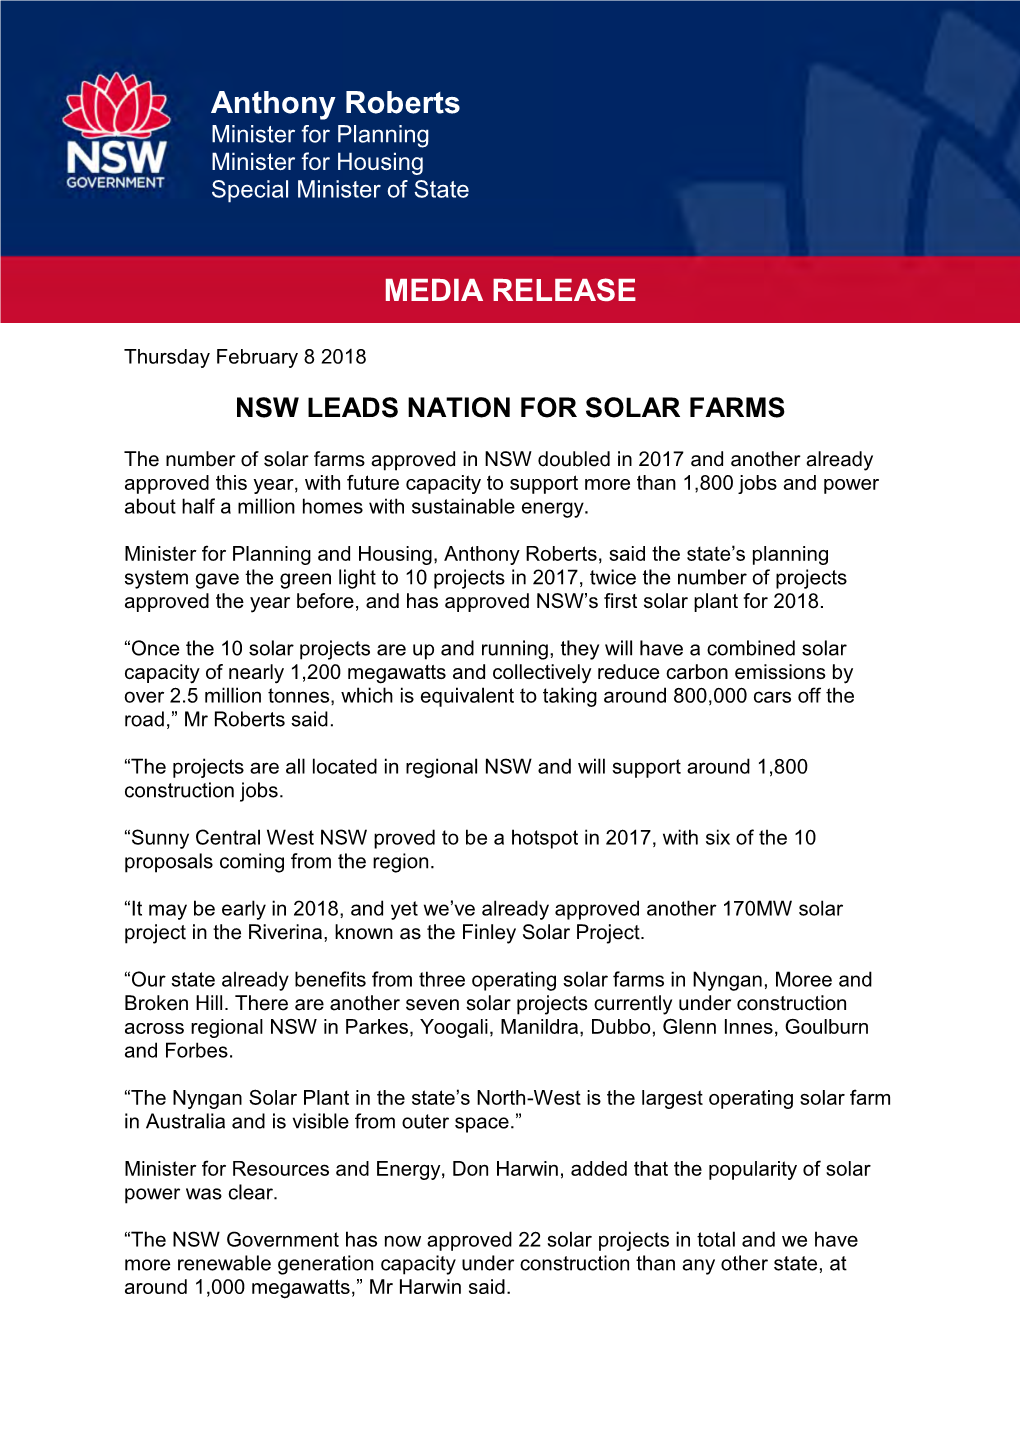 Anthony Roberts MEDIA RELEASE